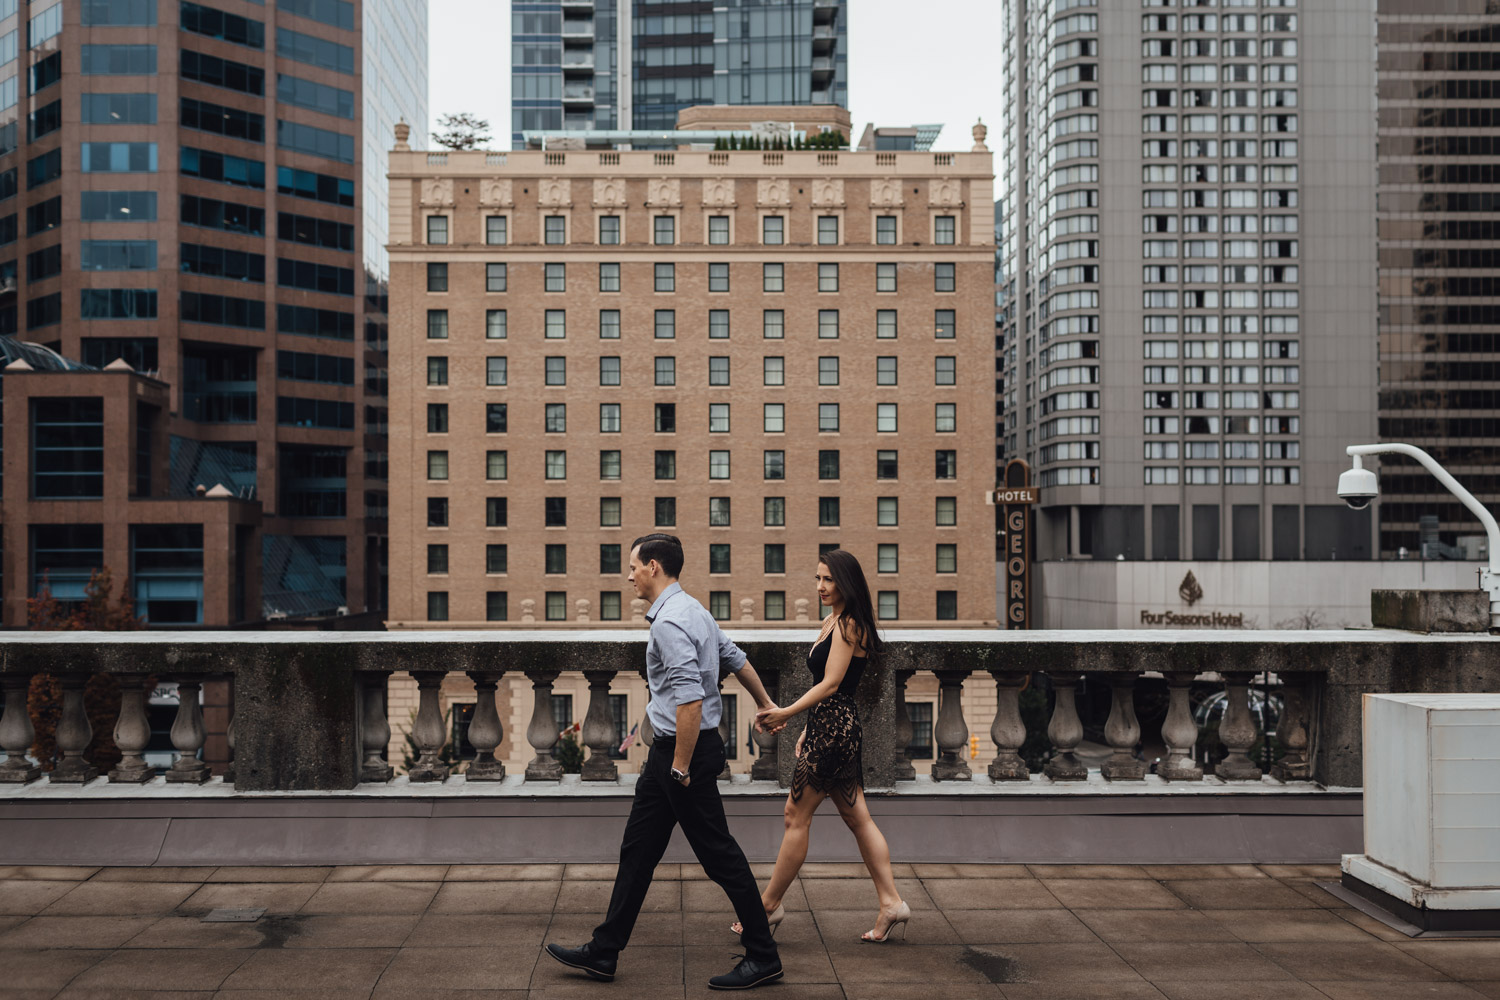 vancouver art gallery rooftop engagement photography downtown vsco